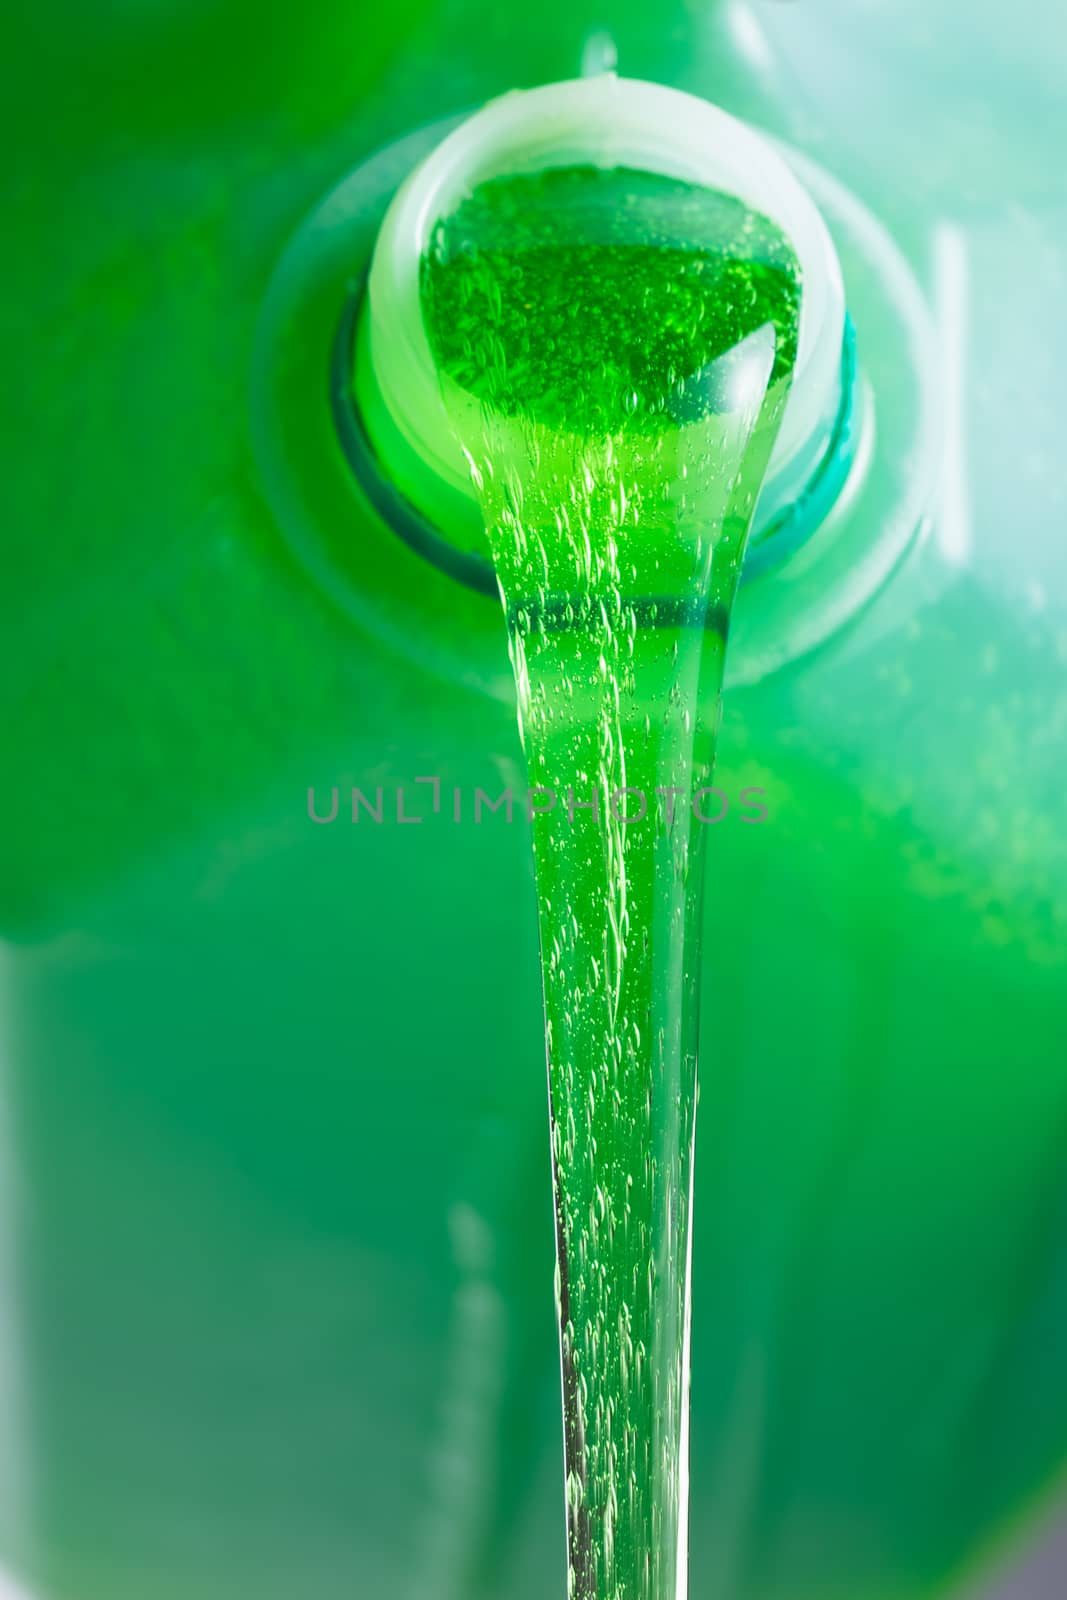 pouring liquid soap, close-up view by nikkytok